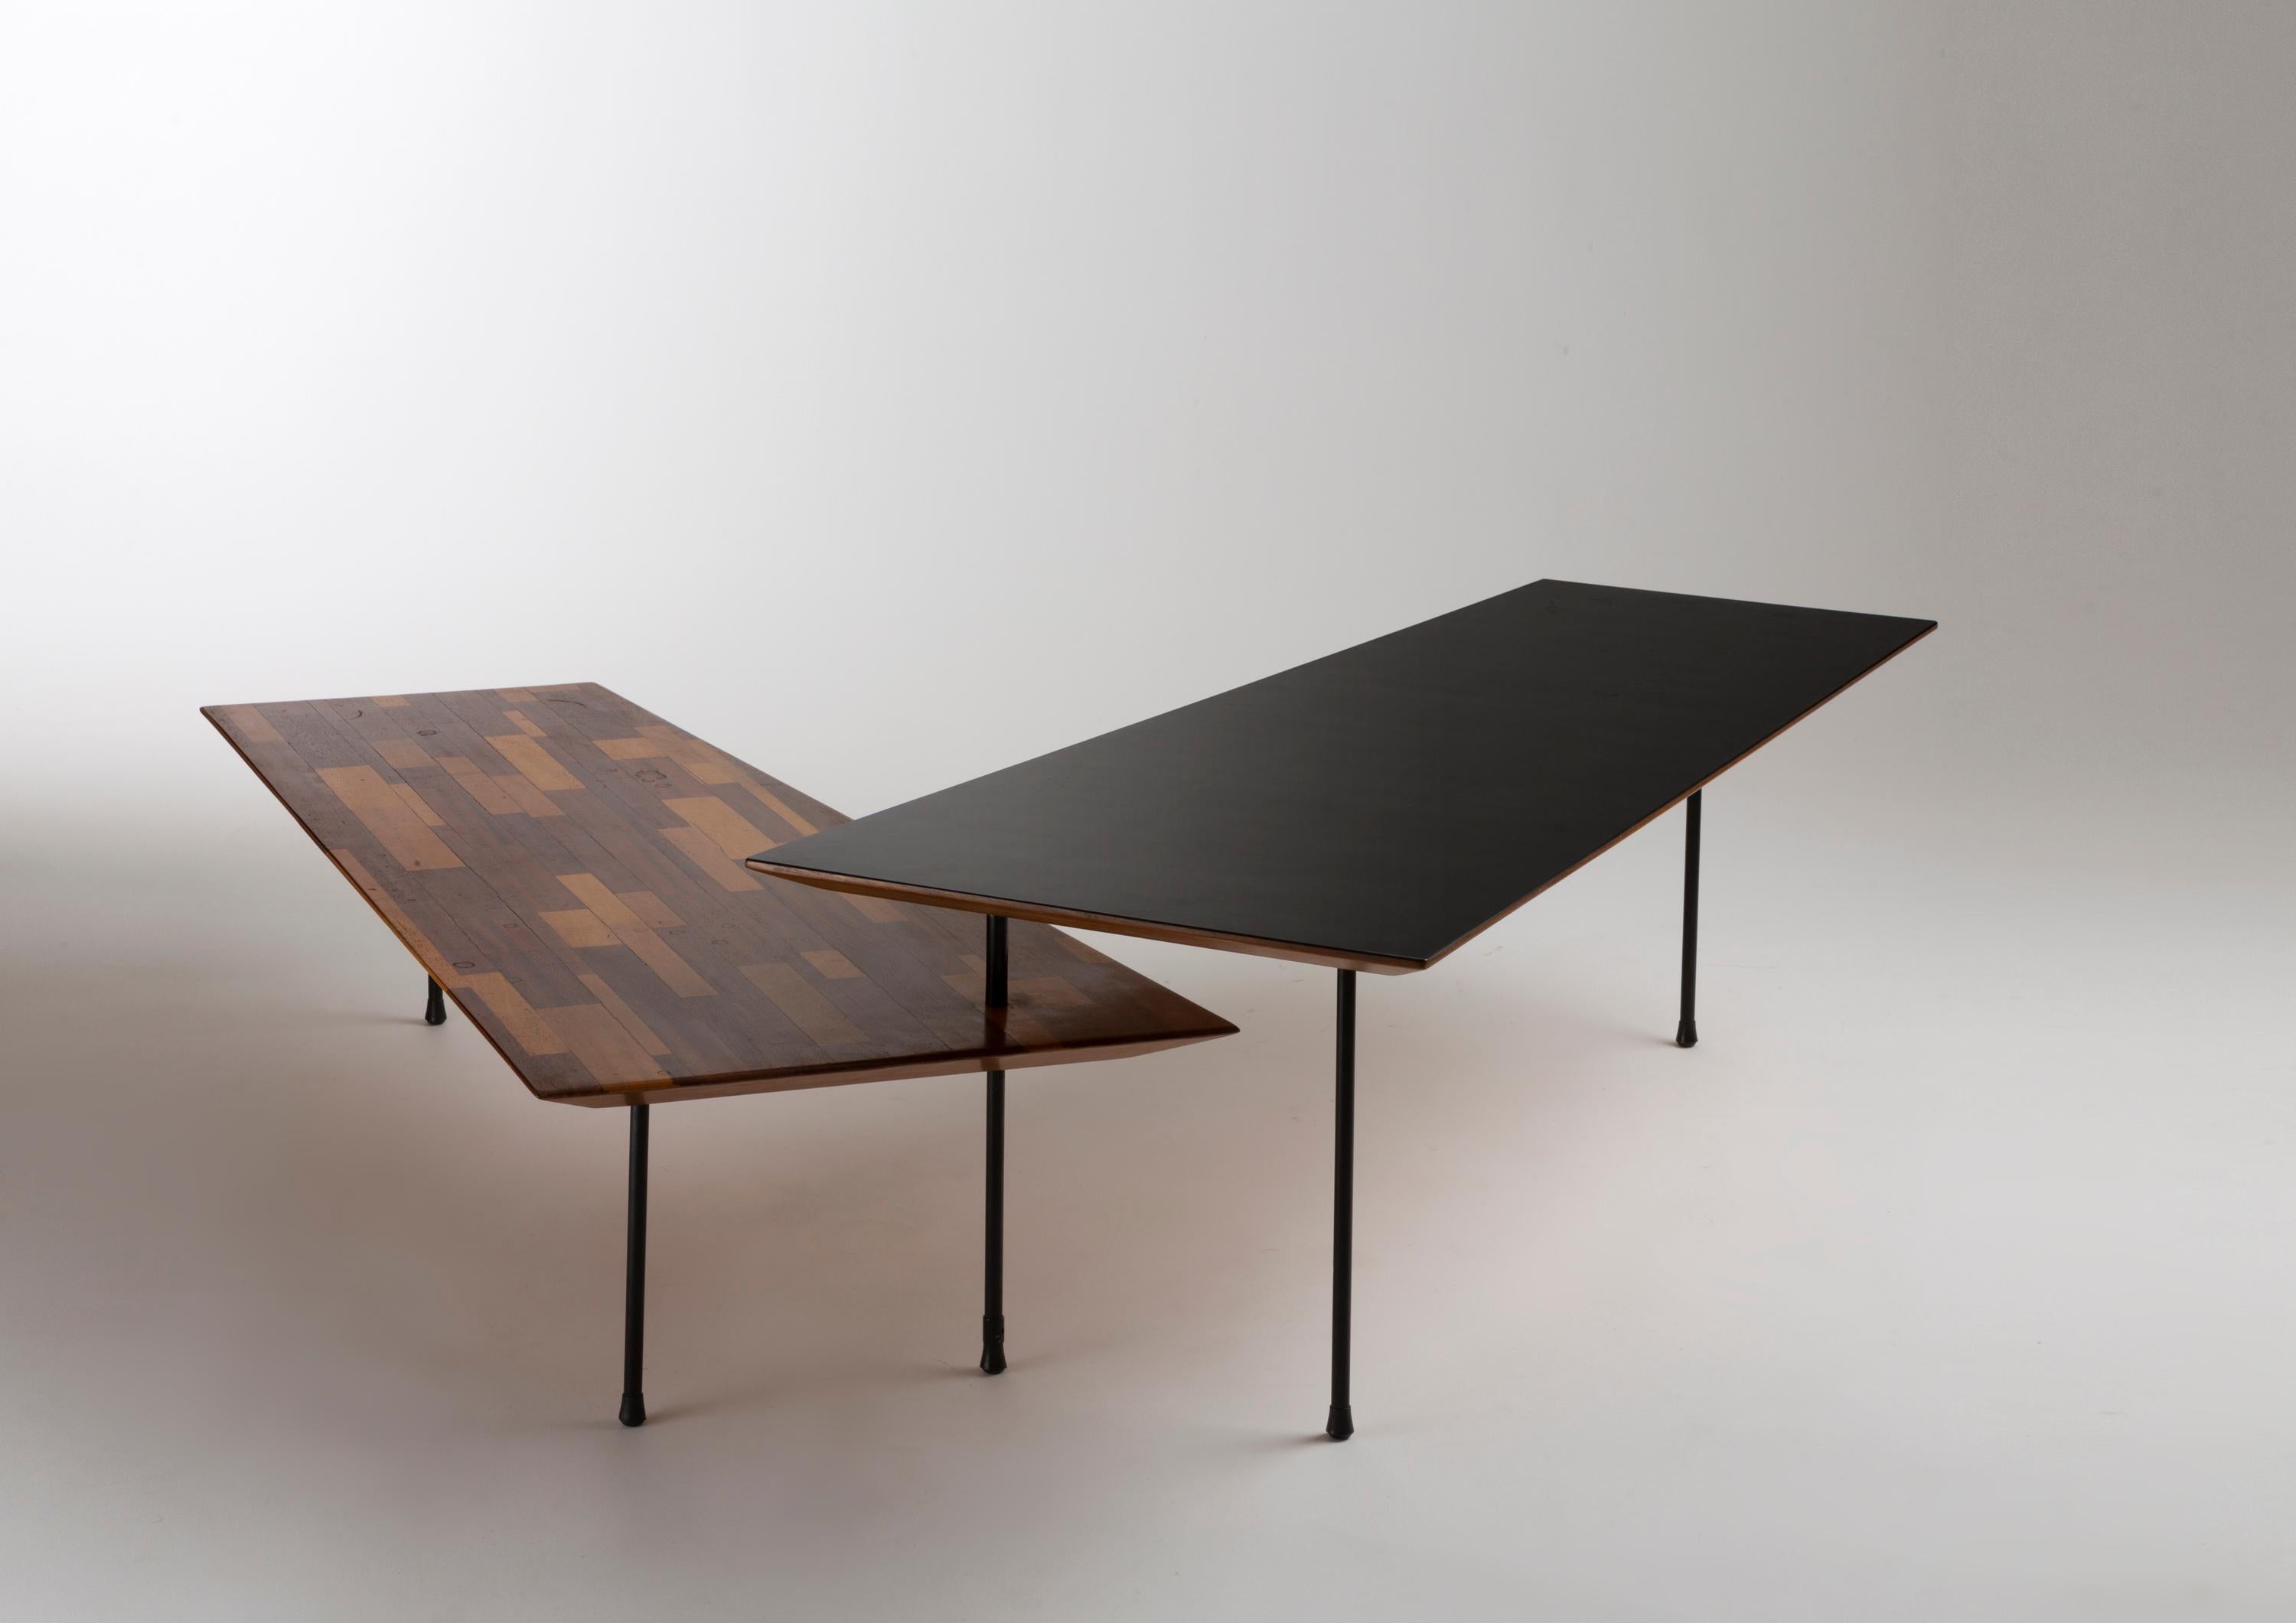 A double top coffee table attributed to Taichiro Nakai, in black lacquered metal, black laminate and wood marquetry, circa 1960

Black top : H_42 cm L_118,5 cm P_52,5 cm
Marquetry top : H_22 cm L_118,5 cm P_52,5 cm
Black top : 16 1/2 x 46 5/8 x